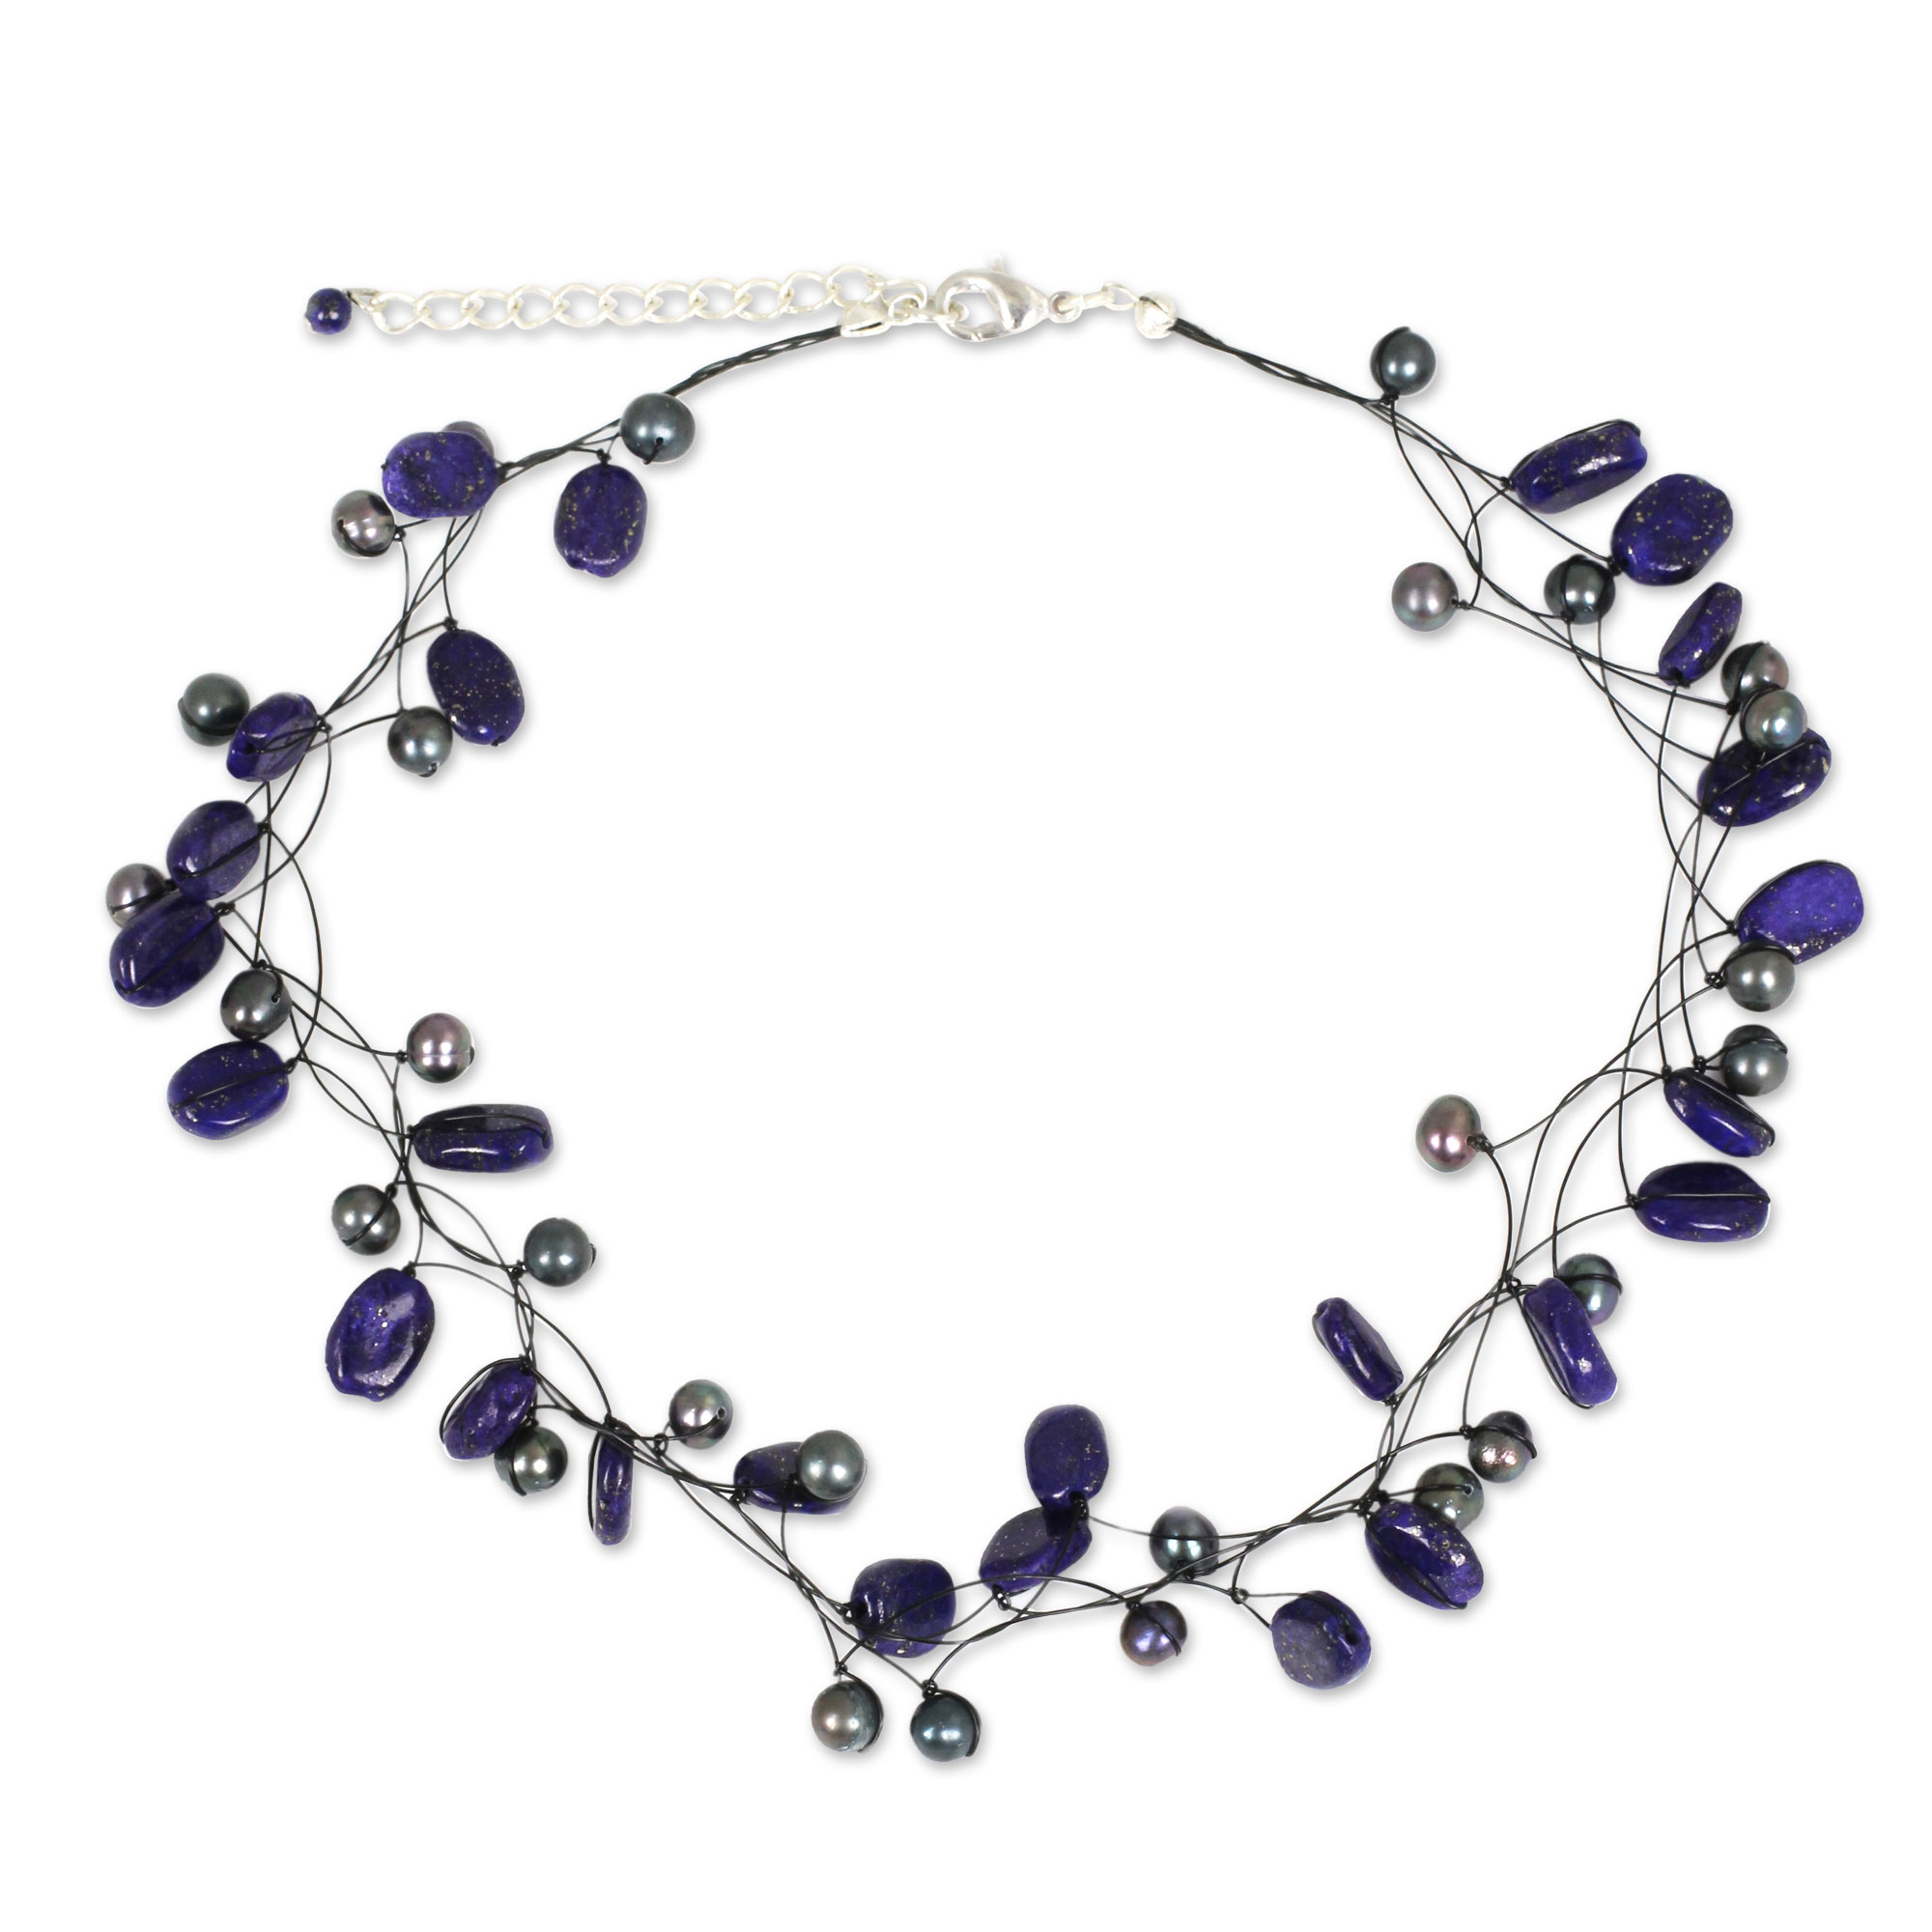 Lapis Lazuli and Cultured Pearl Necklace from Thailand - Ethereal | NOVICA